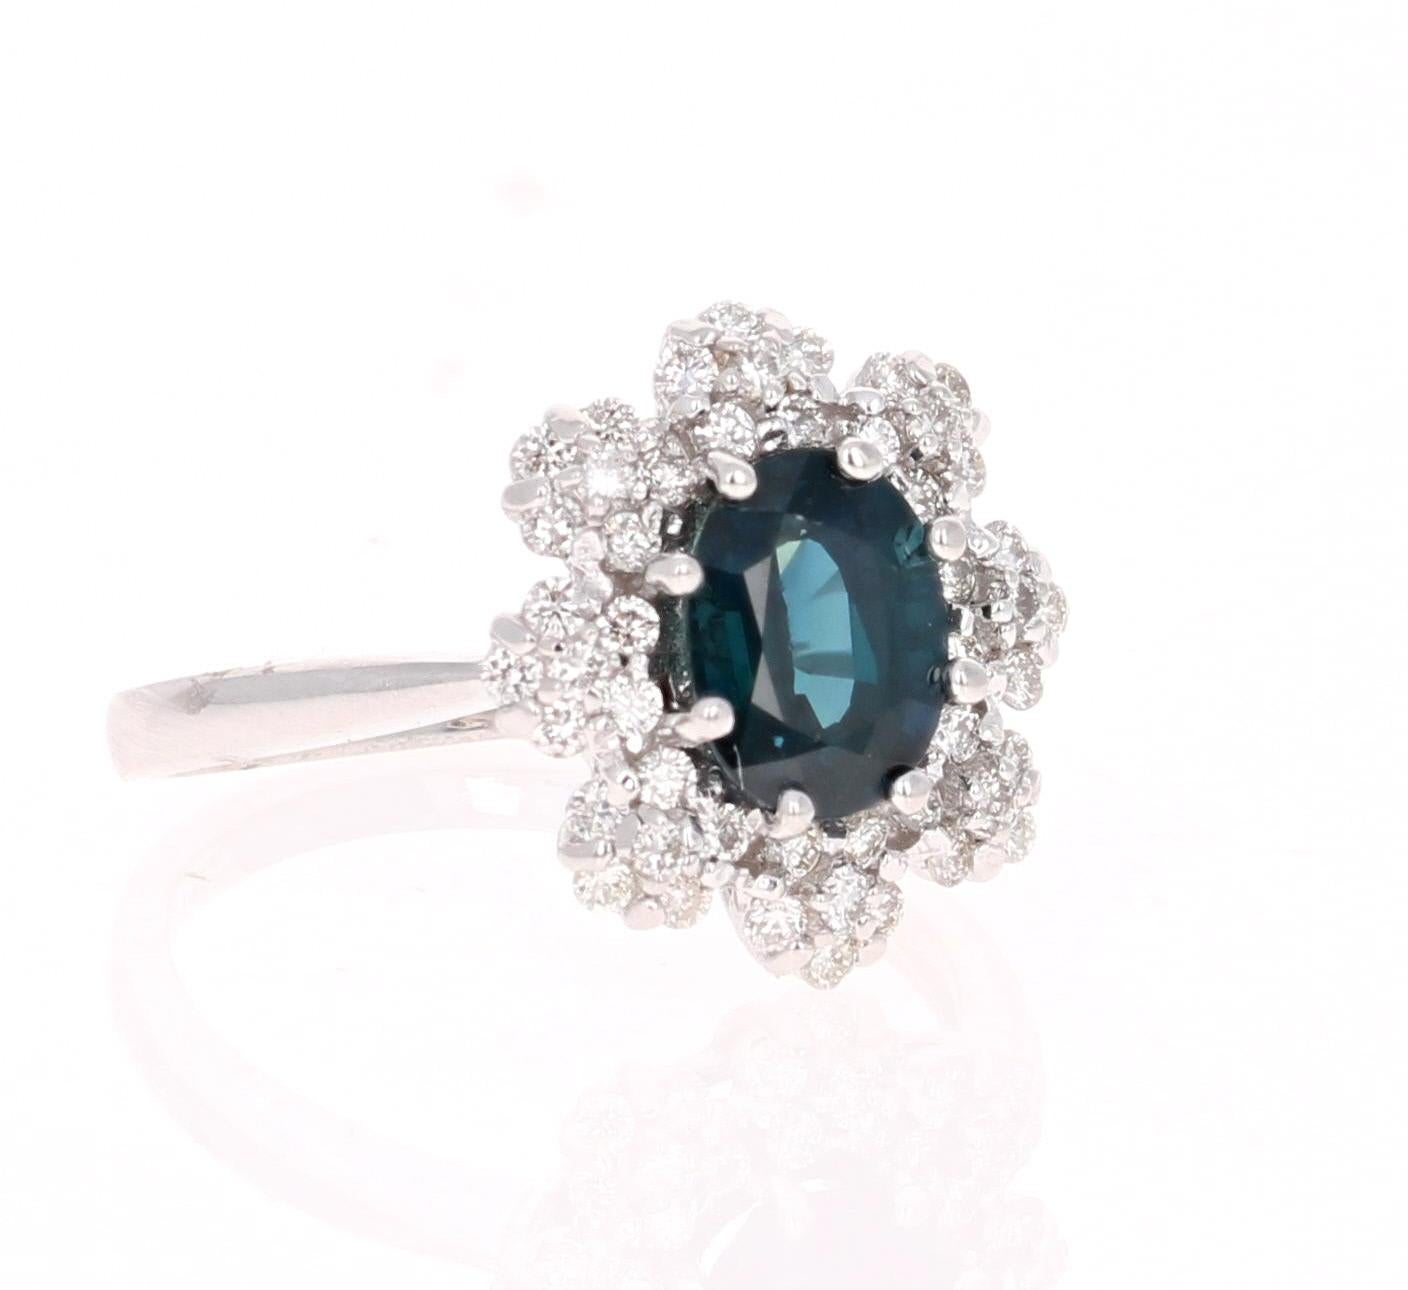 Beautiful Blue Sapphire and Diamond Ring!  This ring has an Oval Cut Sapphire set in the center of the ring that weighs 1.82 Carats. It has 48 Round Cut Diamonds that weigh 0.50 carats set in a petal like design surrounding the Sapphire.  The